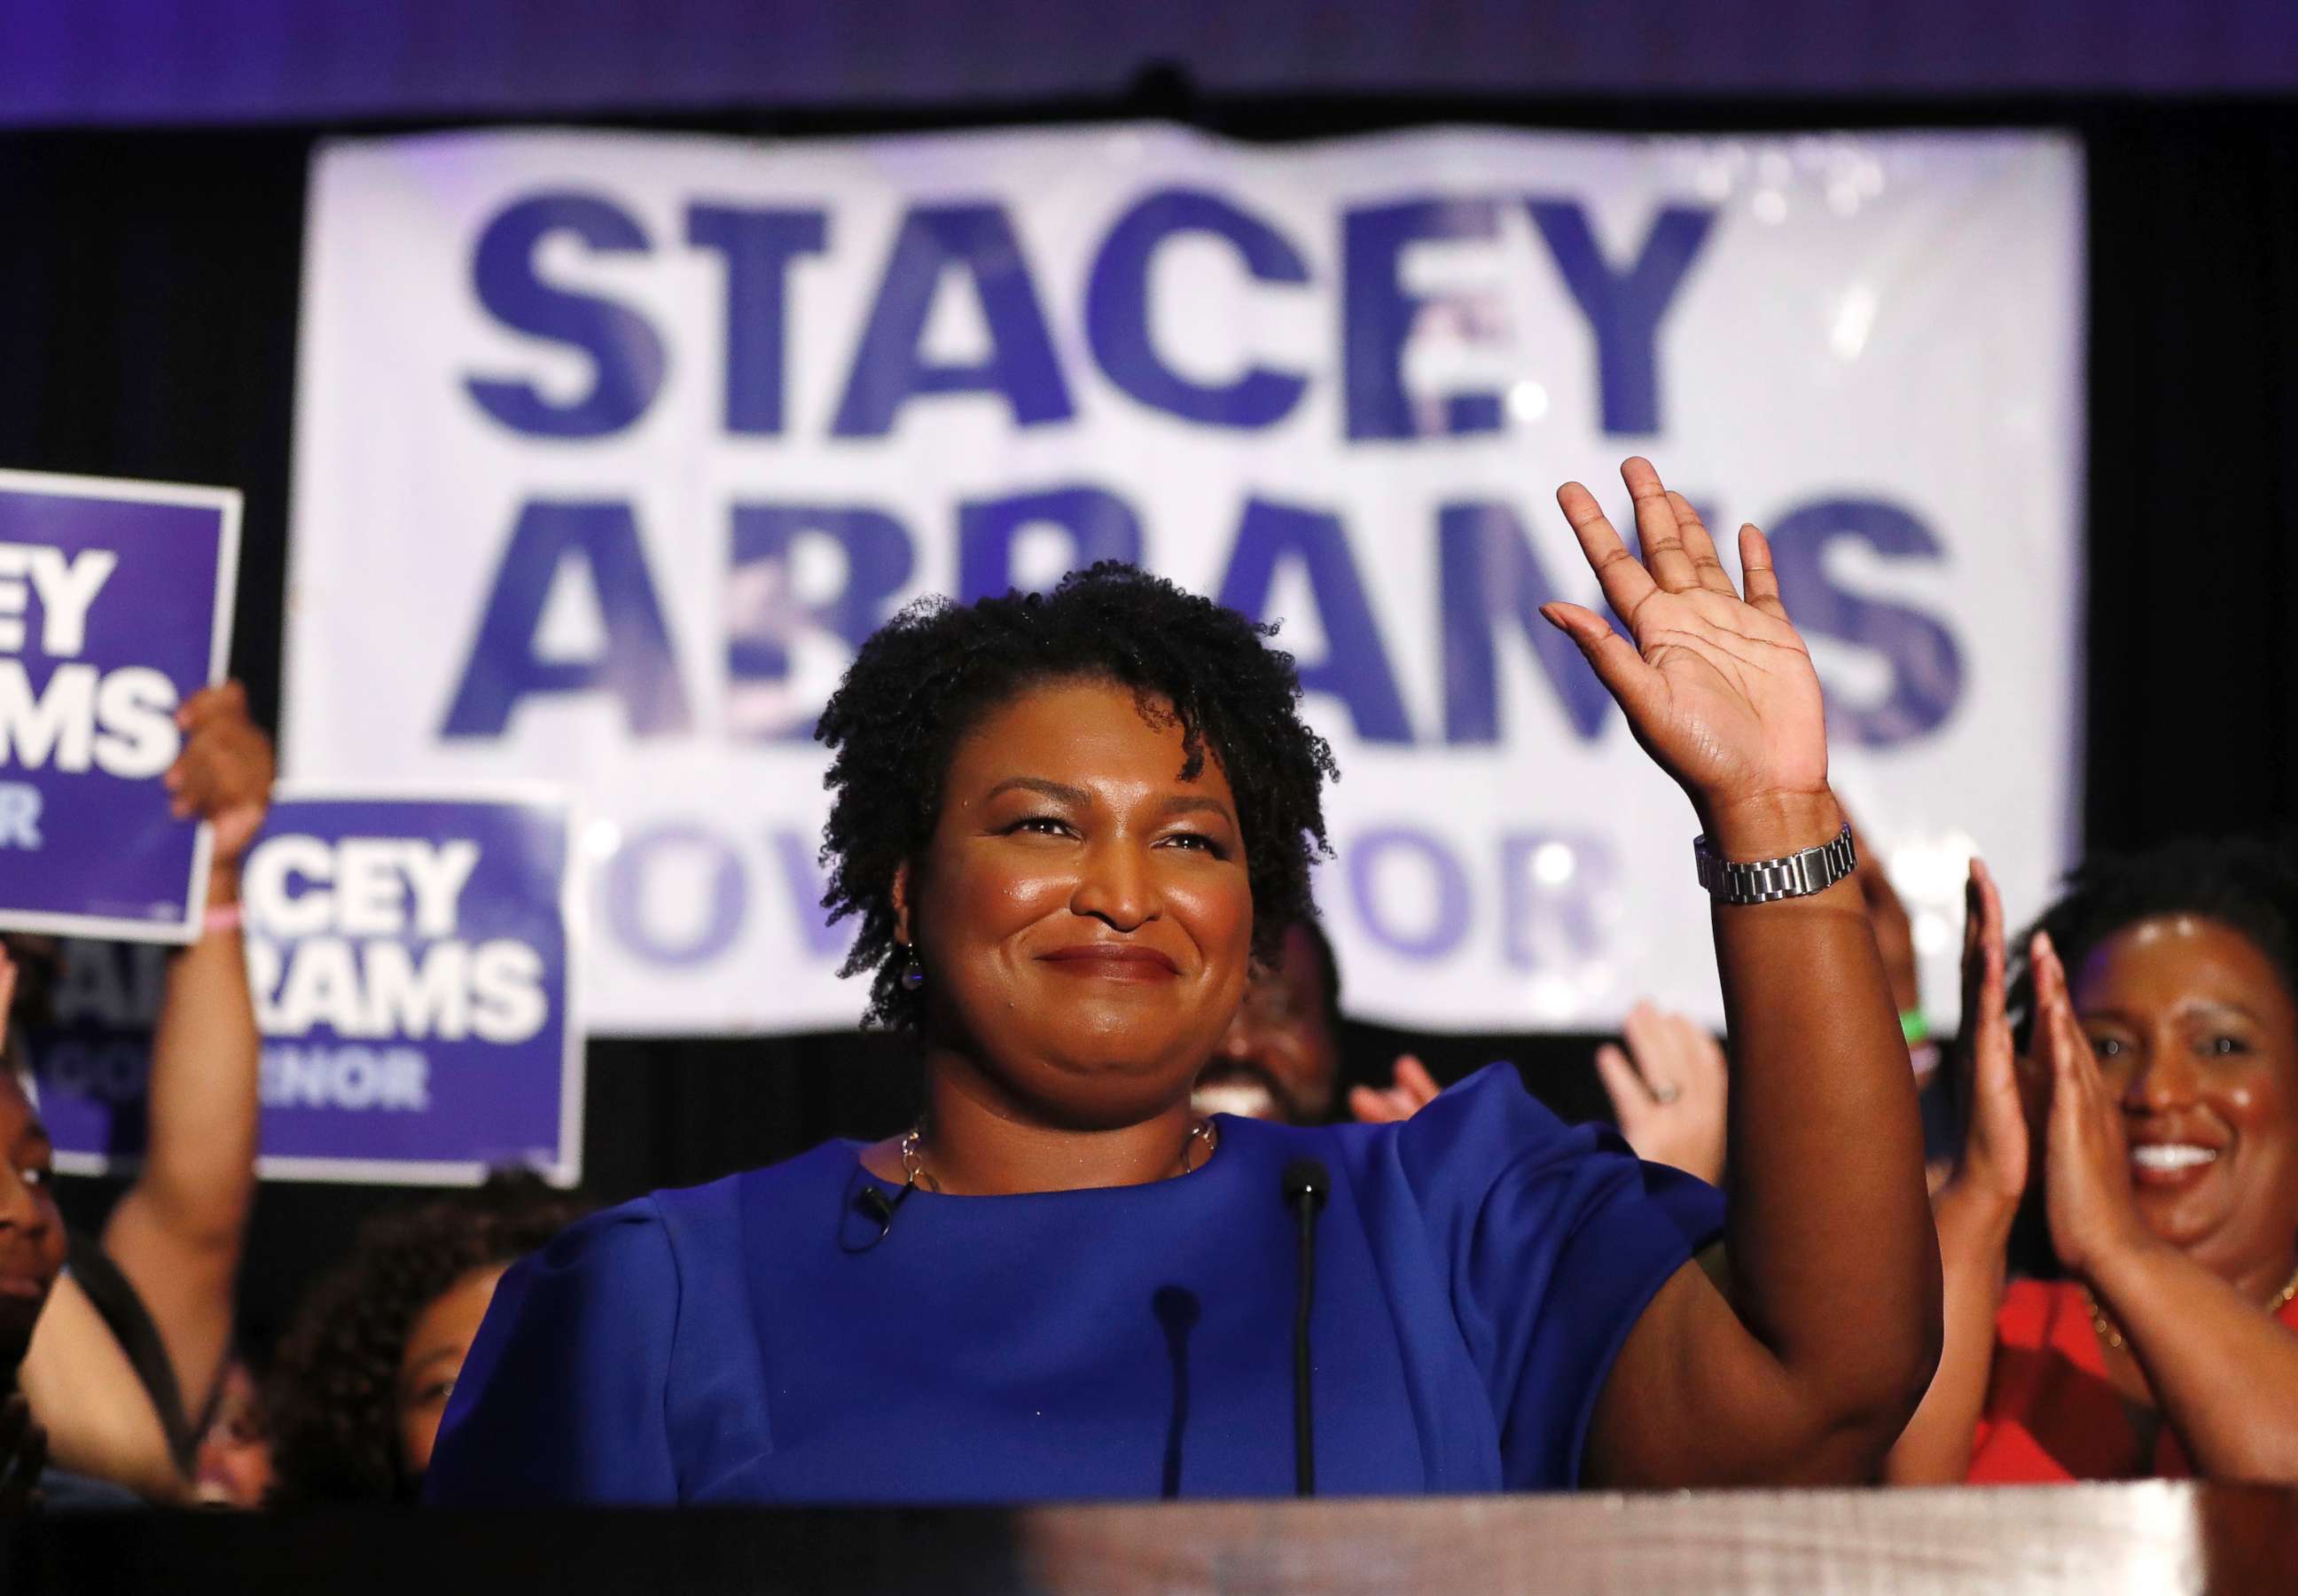 PHOTO: Democratic candidate for Georgia Governor Stacey Abrams waves to supporters after speaking at an election-night watch party, May 22, 2018, in Atlanta.